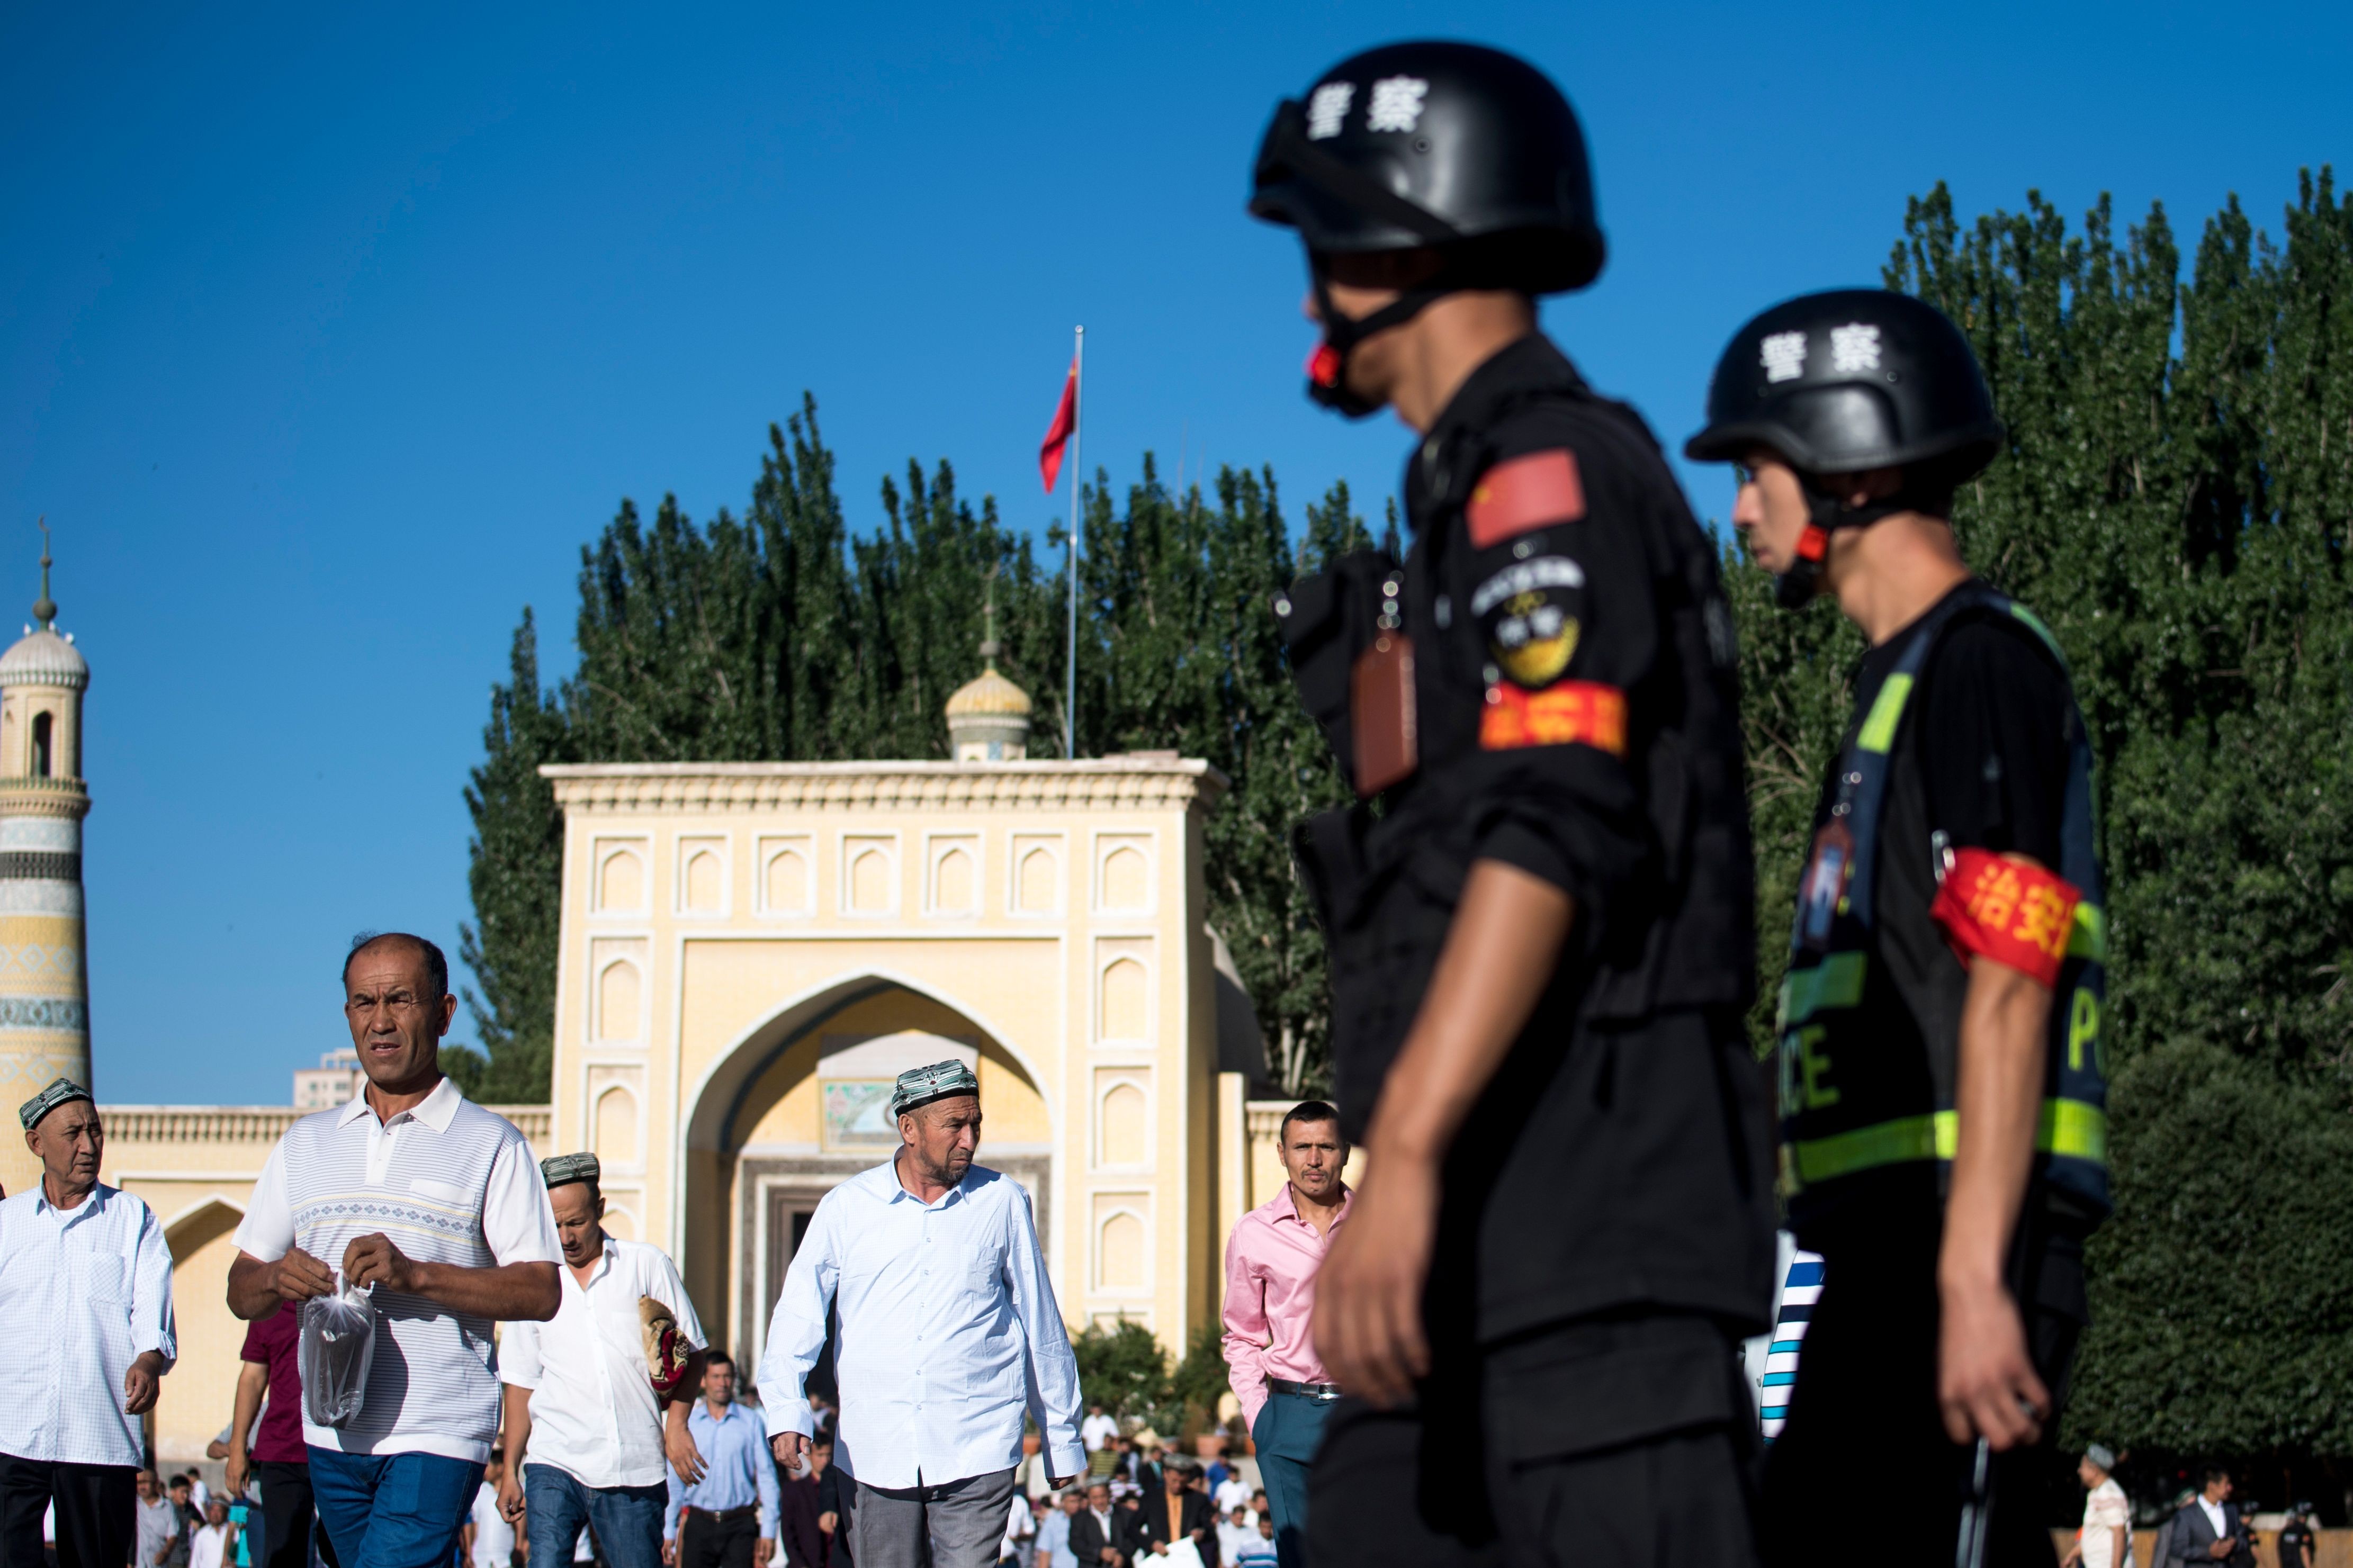 Police patrol the streets as Muslims leave the Id Kah Mosque after the morning prayers in Kashgar, in China’s Xinjiang Uygur autonomous region, in July 2017. Photo: AFP